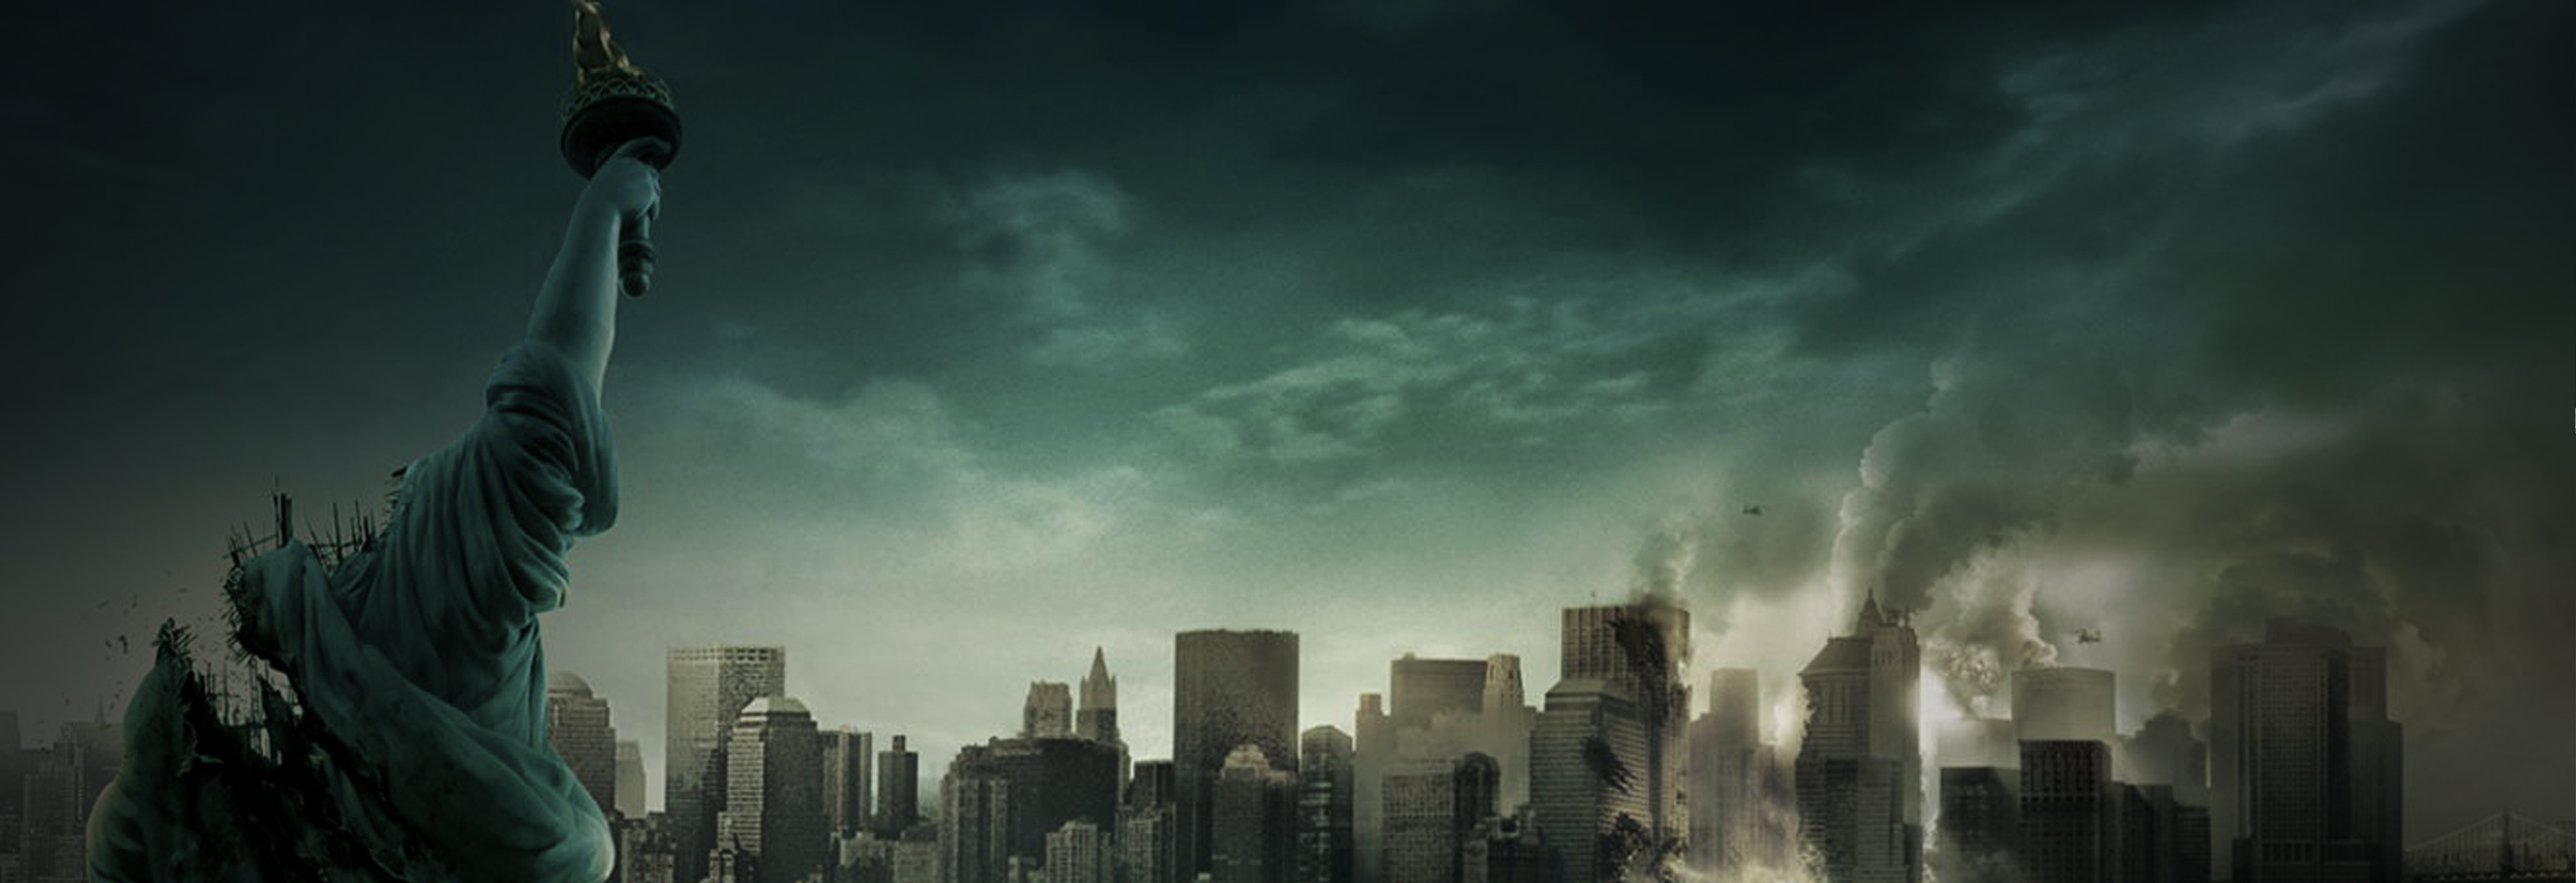 cloverfield synopsys